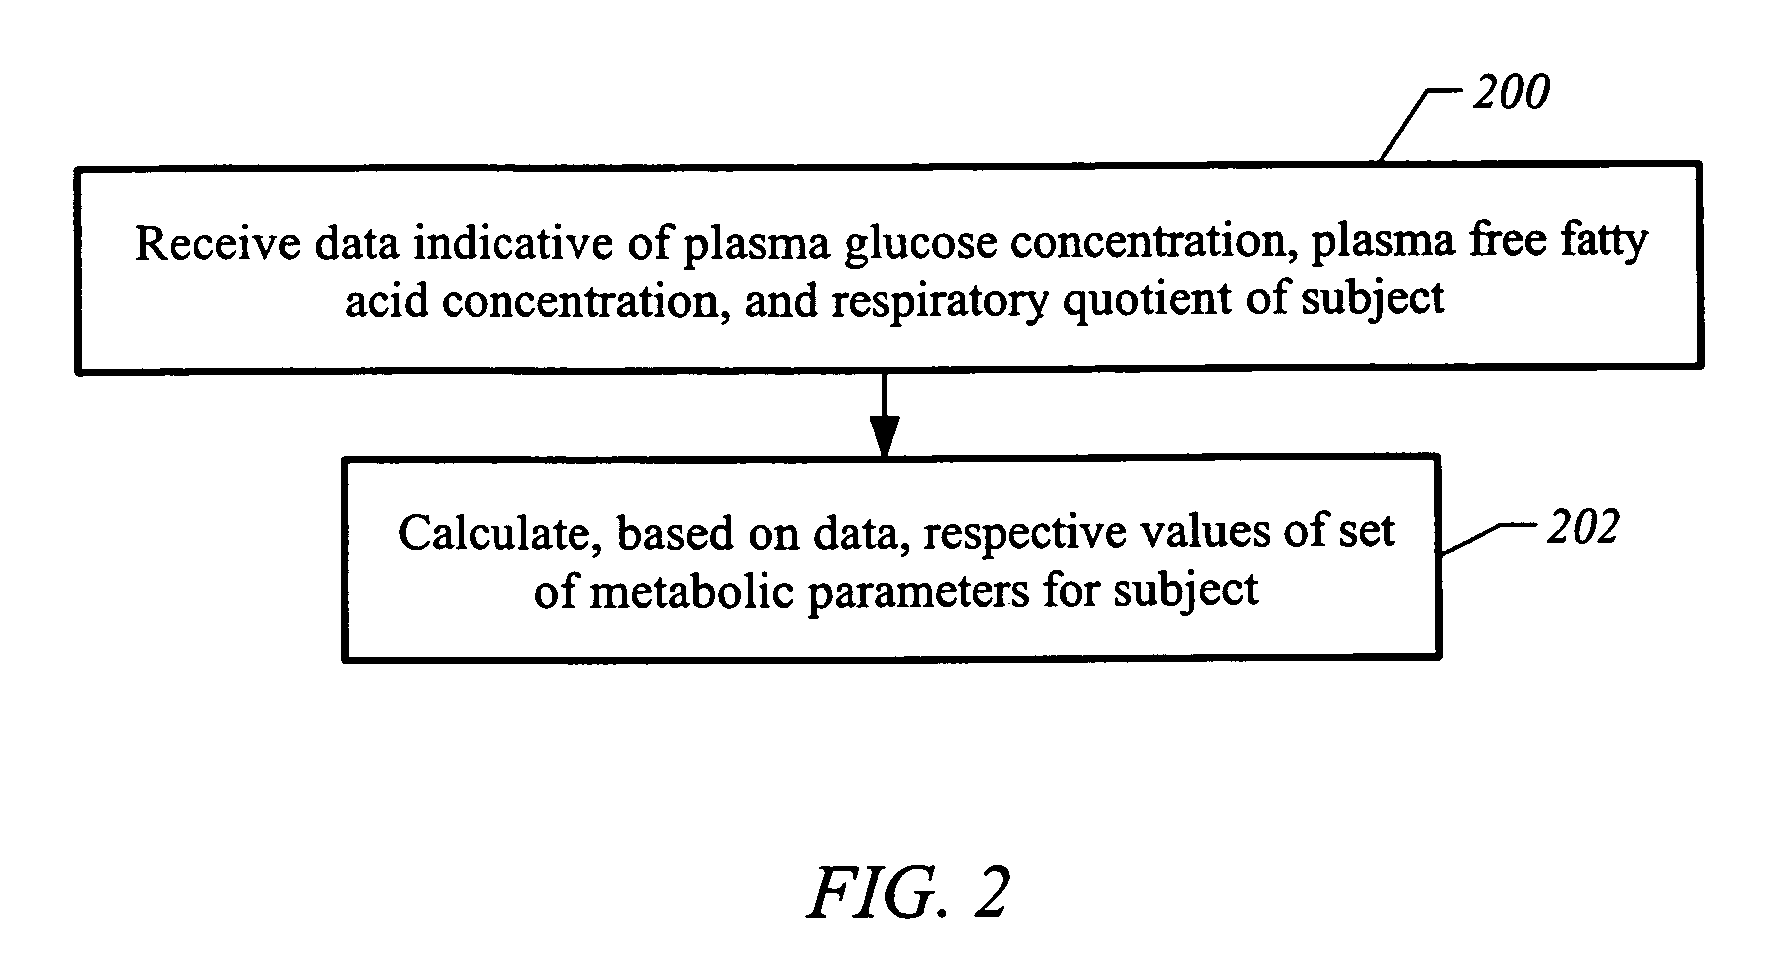 Apparatus and methods for assessing metabolic substrate utilization